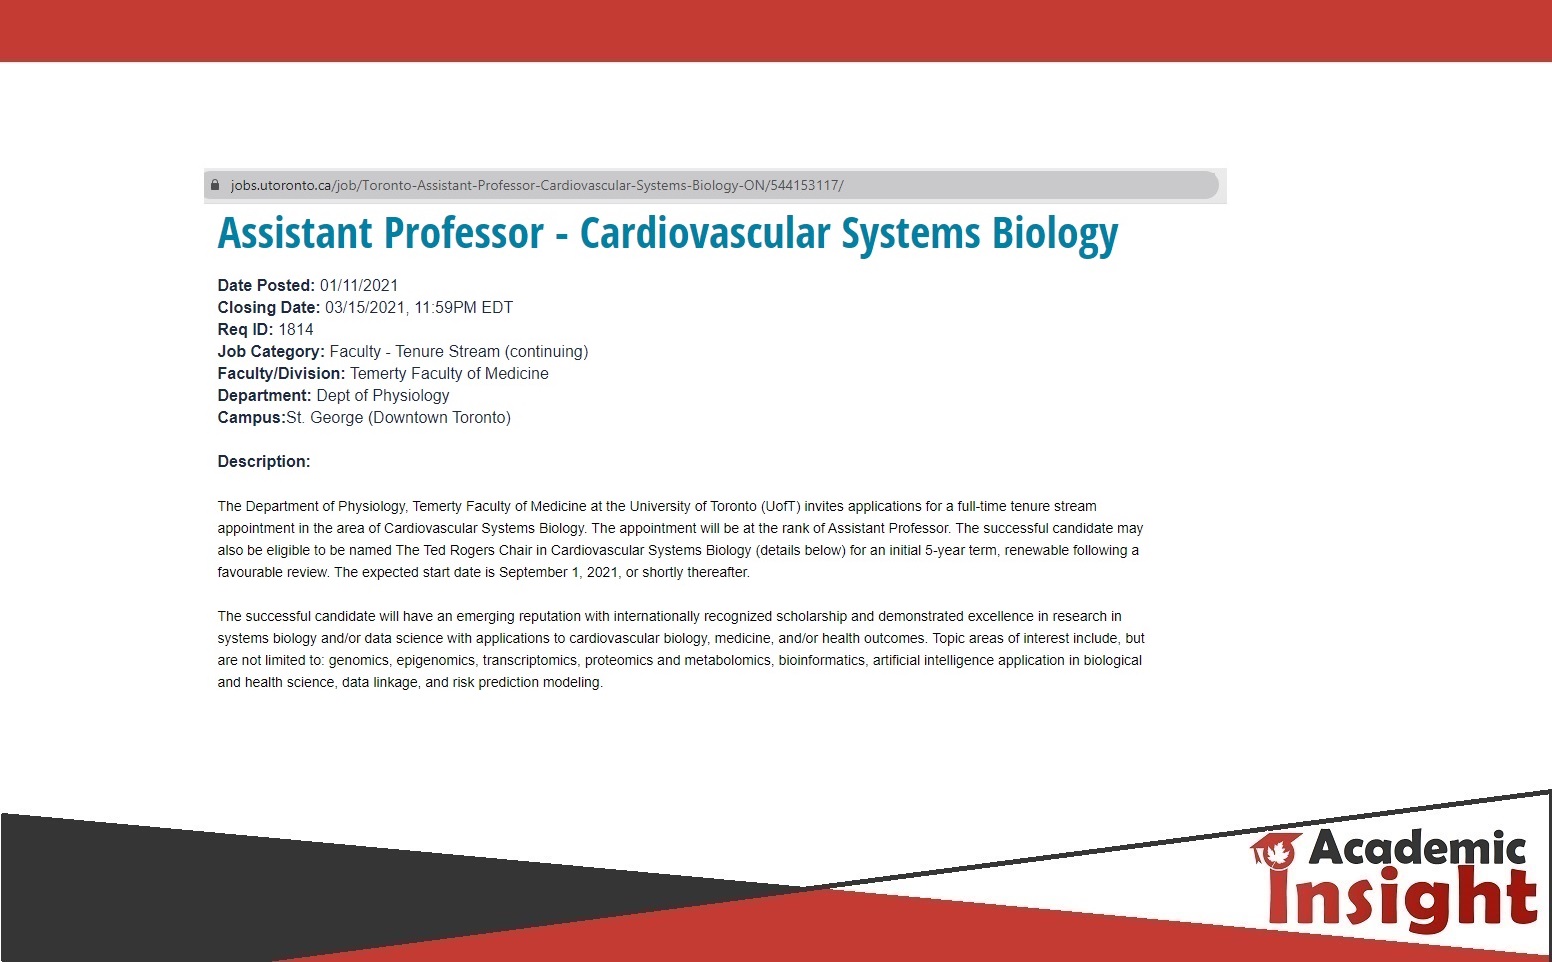 Assistant Professor in Cardiovascular Systems Biology at The University of Toronto